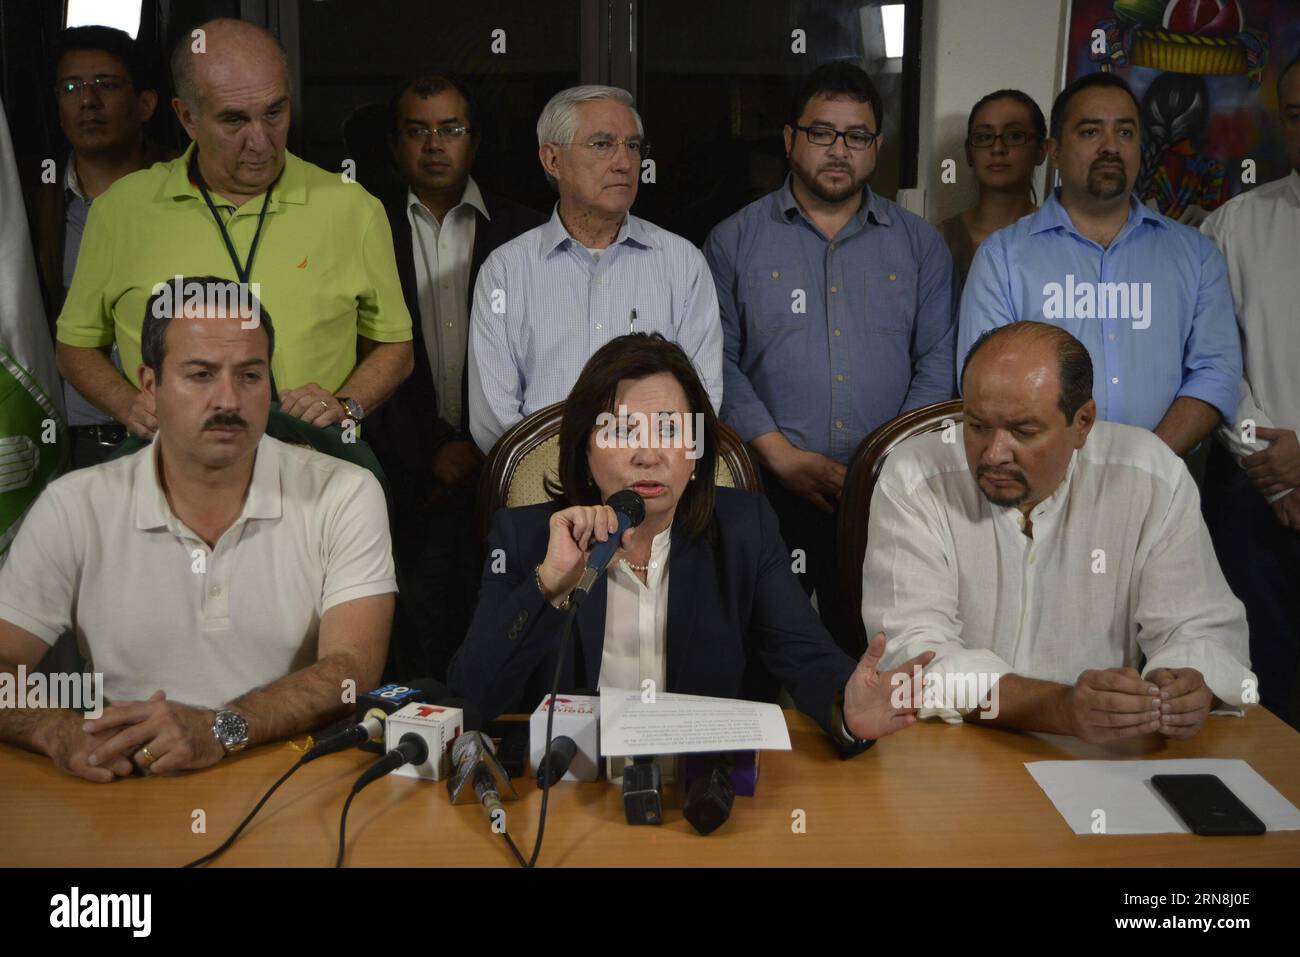 The candidate for the National Unity of Hope (UNE, for its acronym in Spanish) party Sandra Torres (front C) attends a press conference in Guatemala City, capital of Guatemala, on Oct. 25, 2015. Rudy Marlon Pineda, president of the Supreme Electoral Court (TSE, for its acronym in Spanish), expressed in a press confrerence that 87.17 percent of the reception boards of votes have been counted. According to the local press, Jimmy Morales, comedian and candidate of the right wing National Convergence Front FCN (for its acronym in Spanish) party, is the virtual winner of the runoff election in Guat Stock Photo